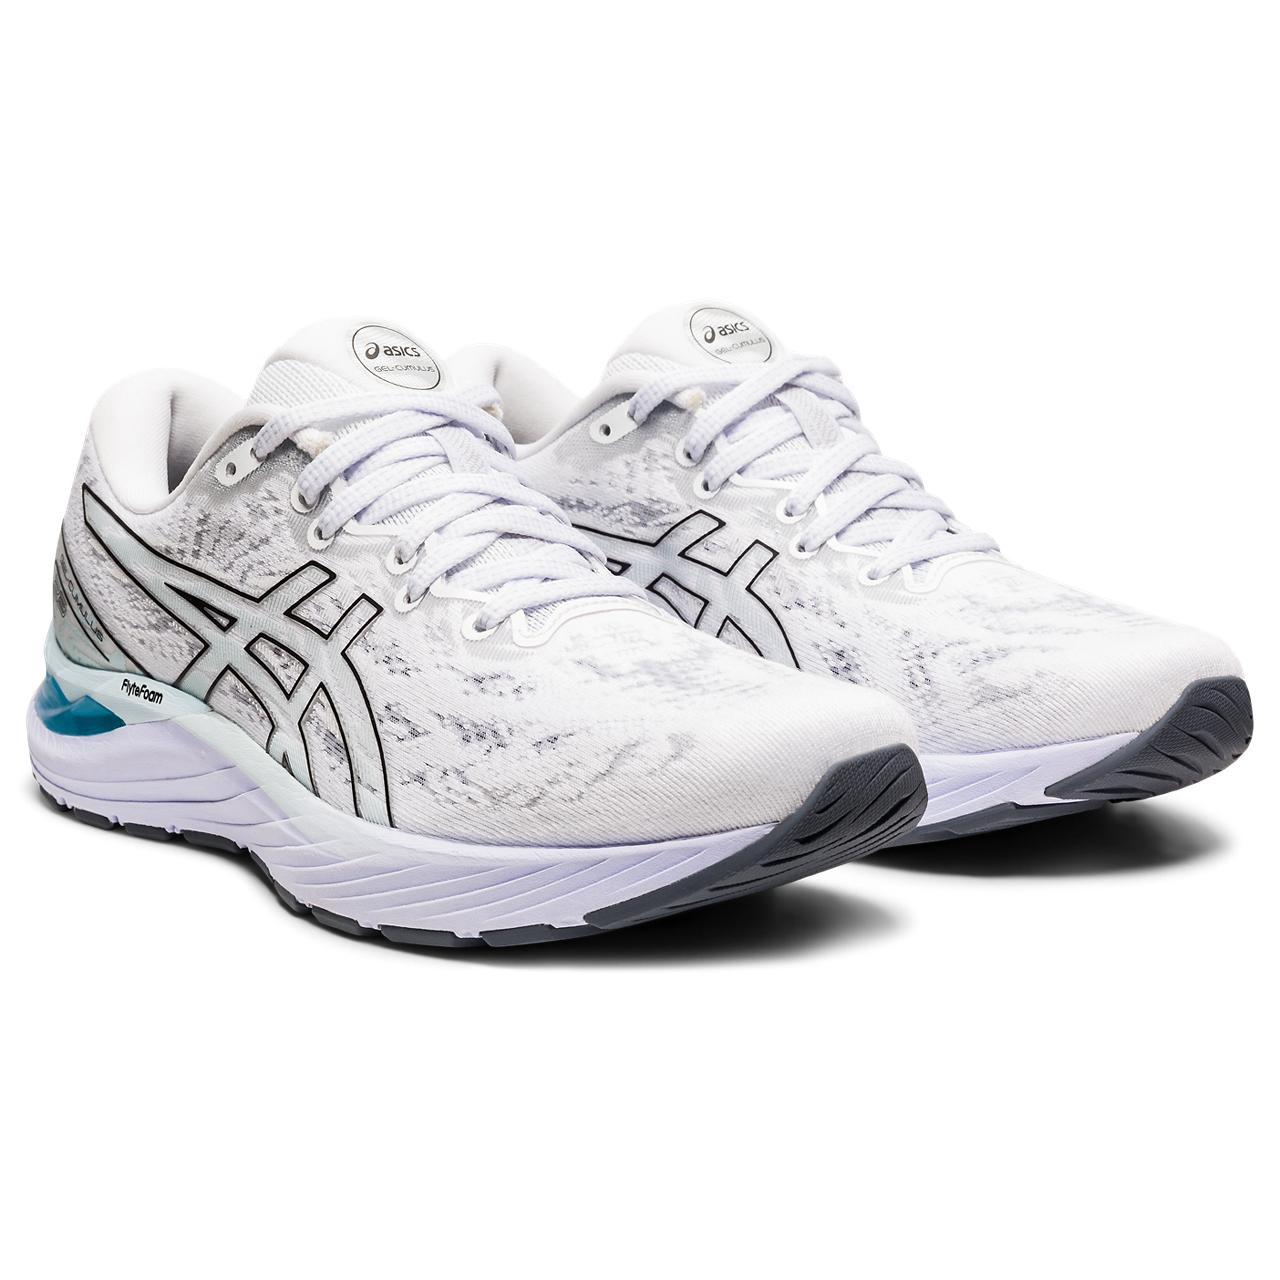 The Women's ASICS Gel-Cumulus 23 focus is to provide a smooth and soft ride while implementing gender specific technology. Continuing to draw inspiration from cumulus clouds, ASICS reimagined this neutral running shoe's upper and midsole formation by applying a more holistic design approach that adapts to the runner's anatomy in motion.